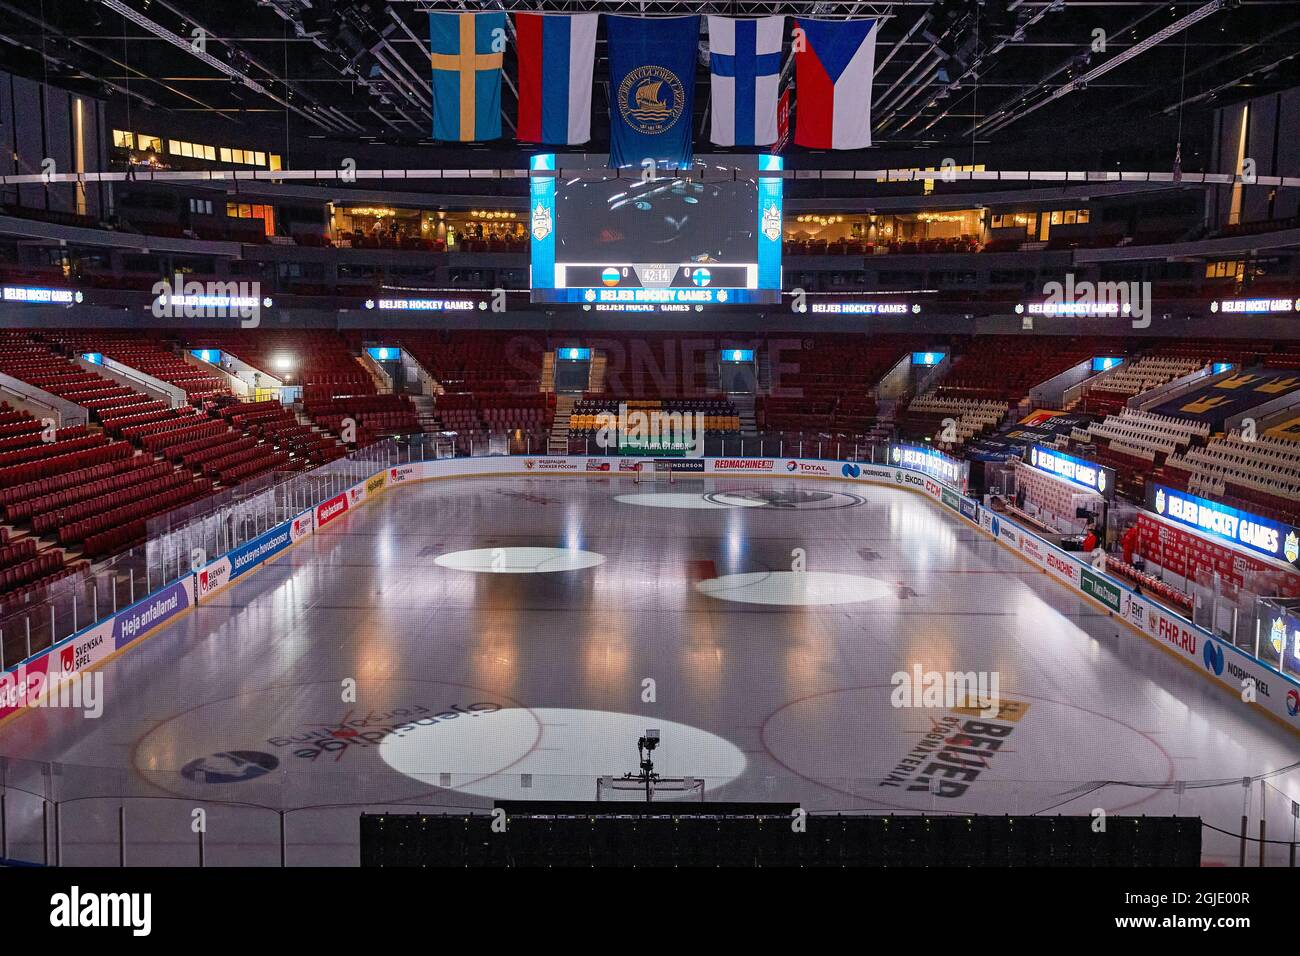 An interior overview of the Malmo Arena to the Beijer Hockey Games (Euro Hockey Tour)